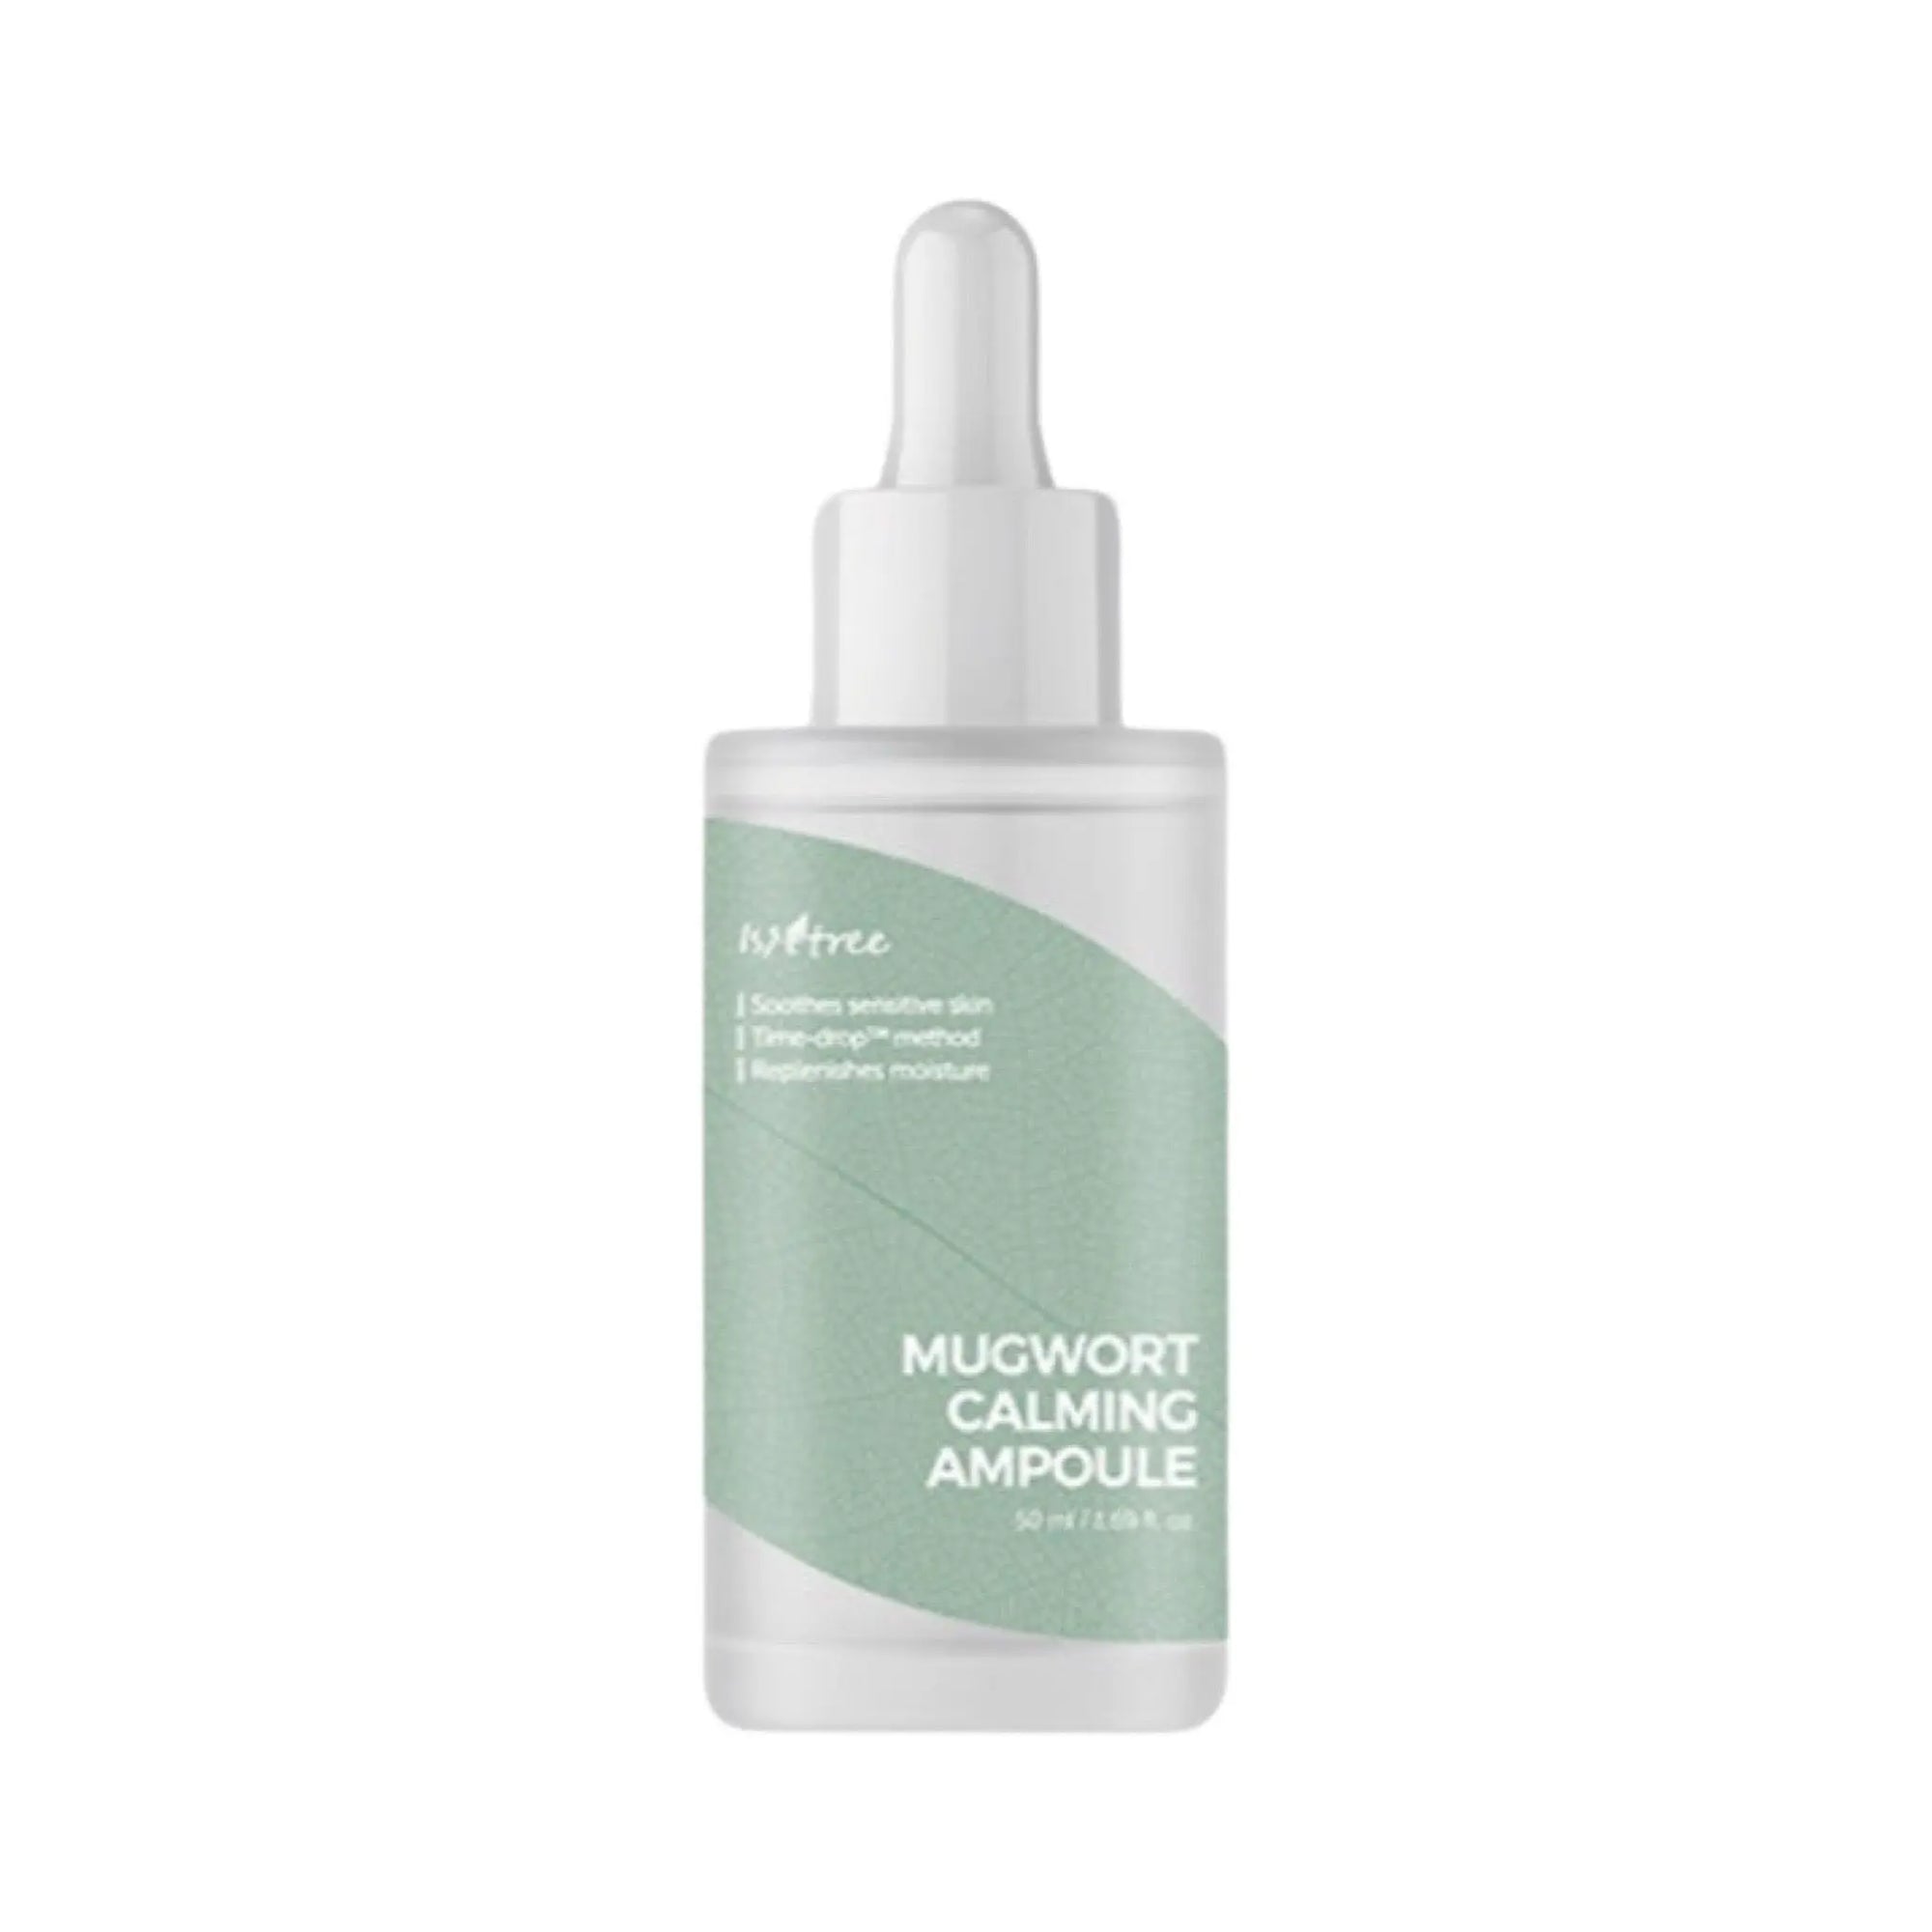 Isntree - Mugwort Calming Ampoule 50mL Isntree